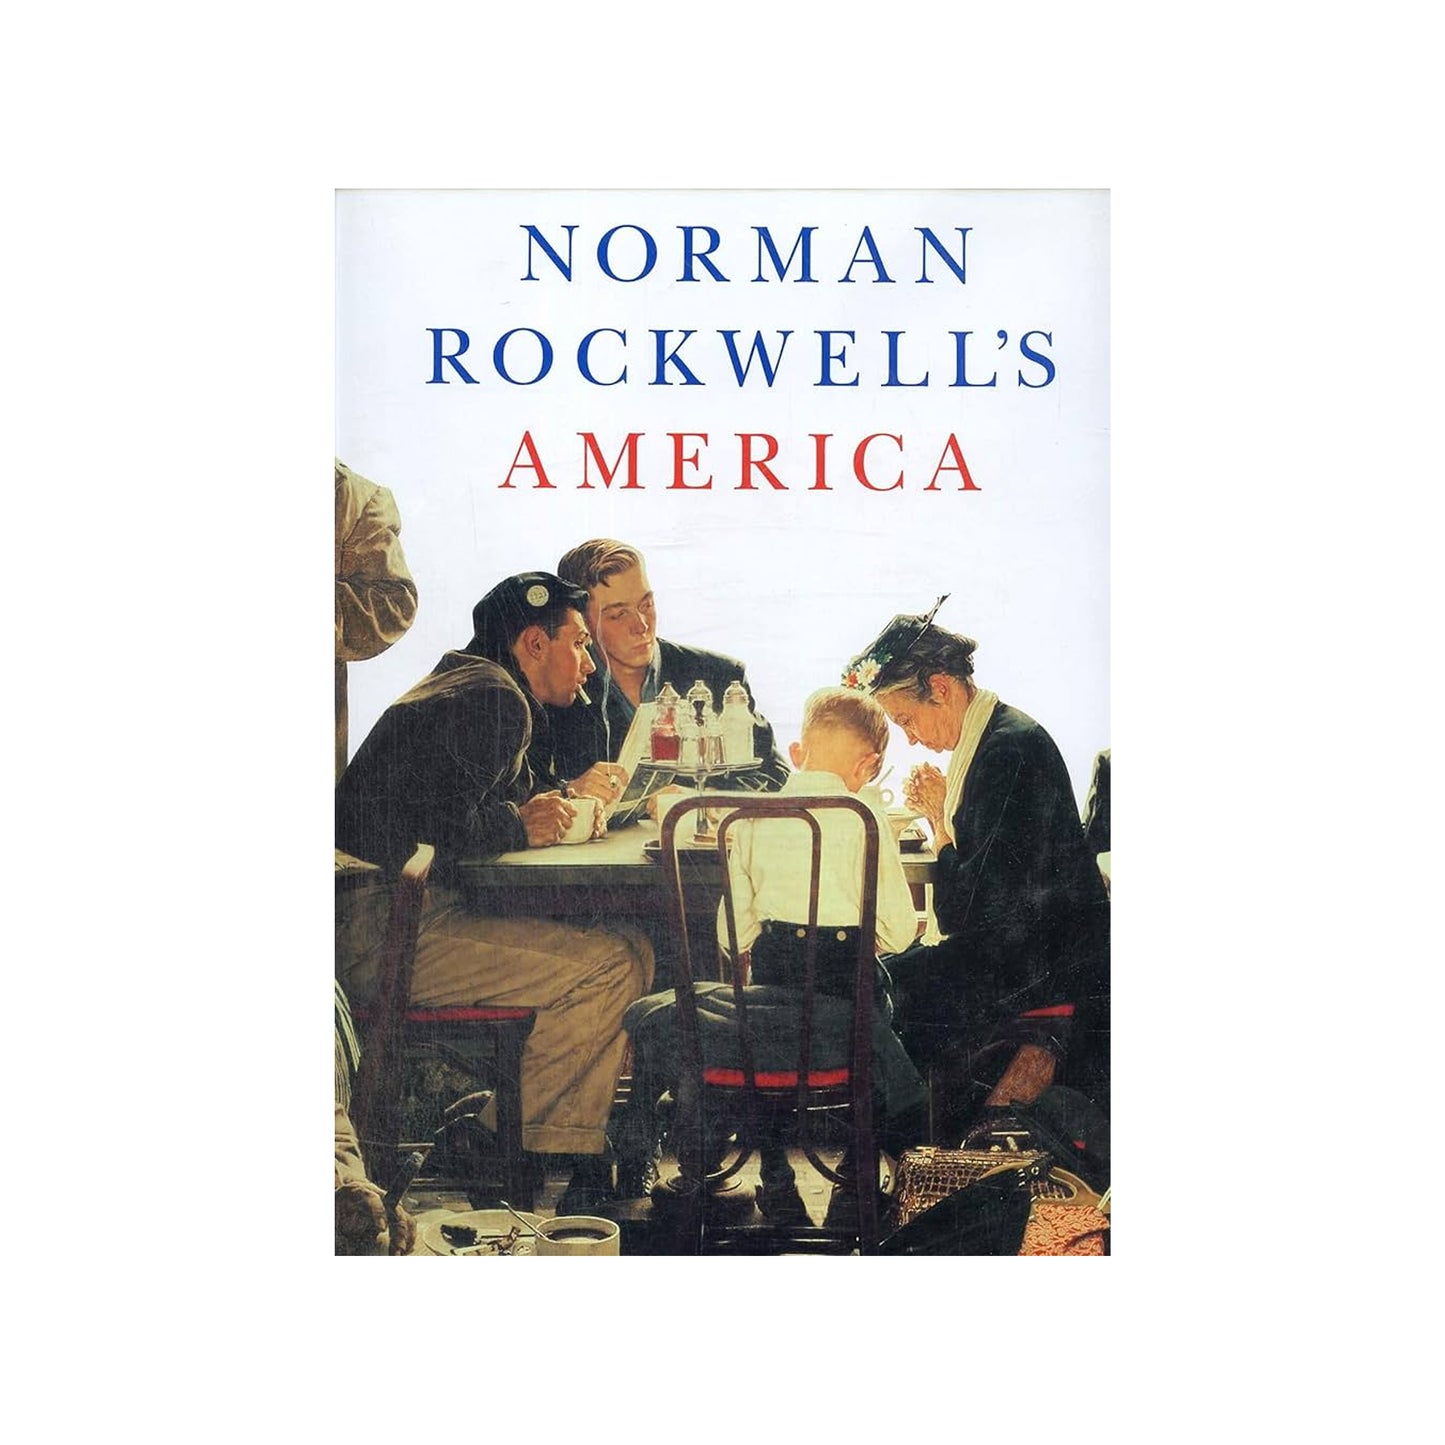 Norman Rockwell's America by Christopher Finch